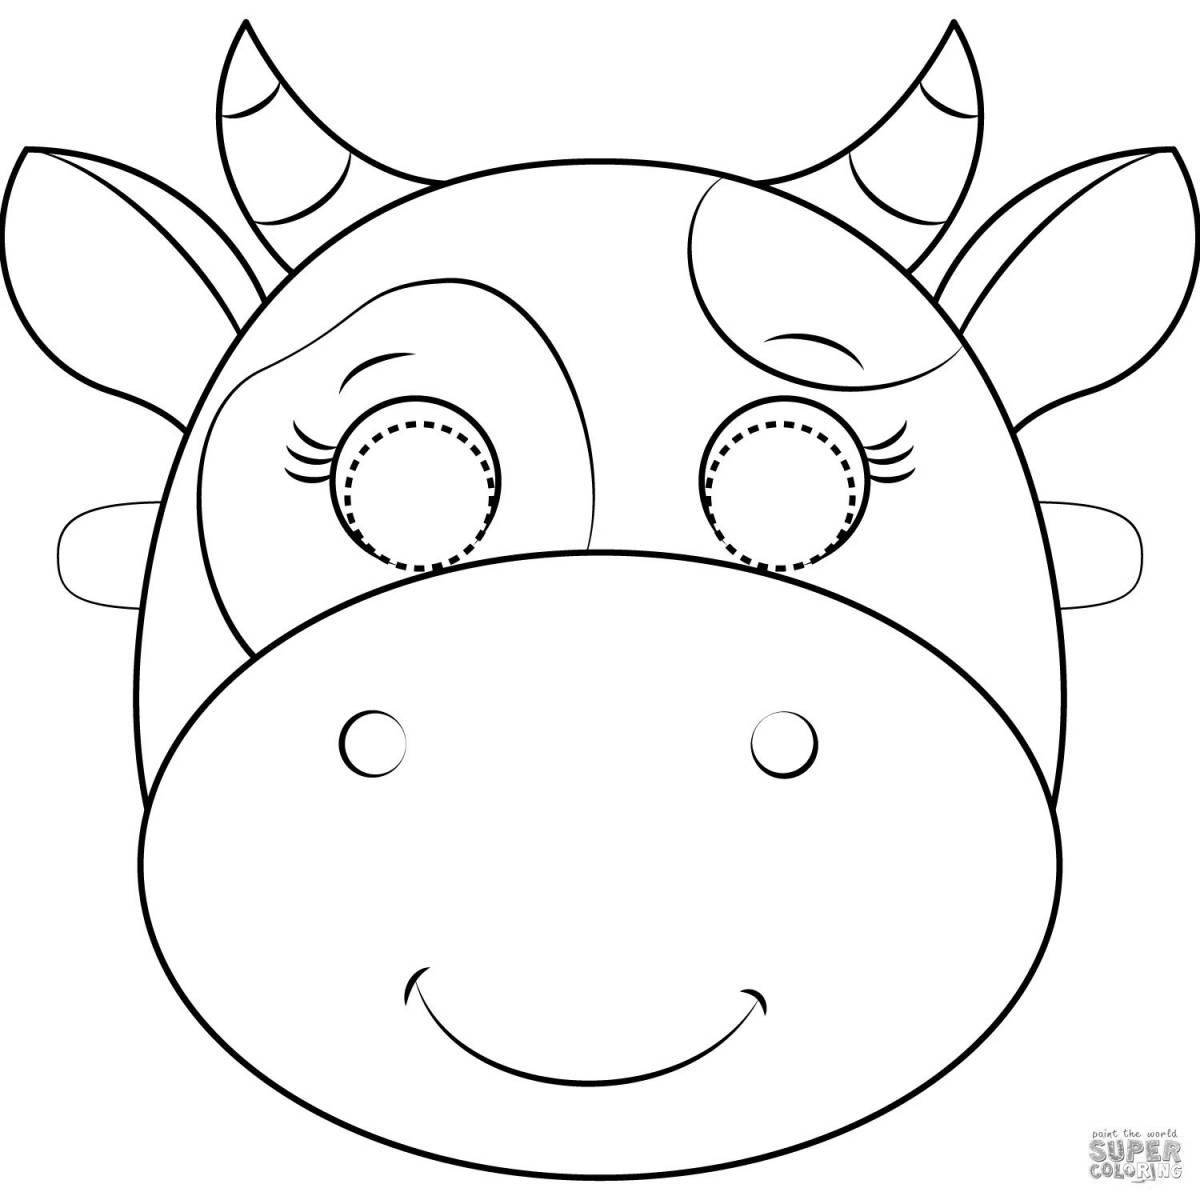 Glitter cow head coloring page